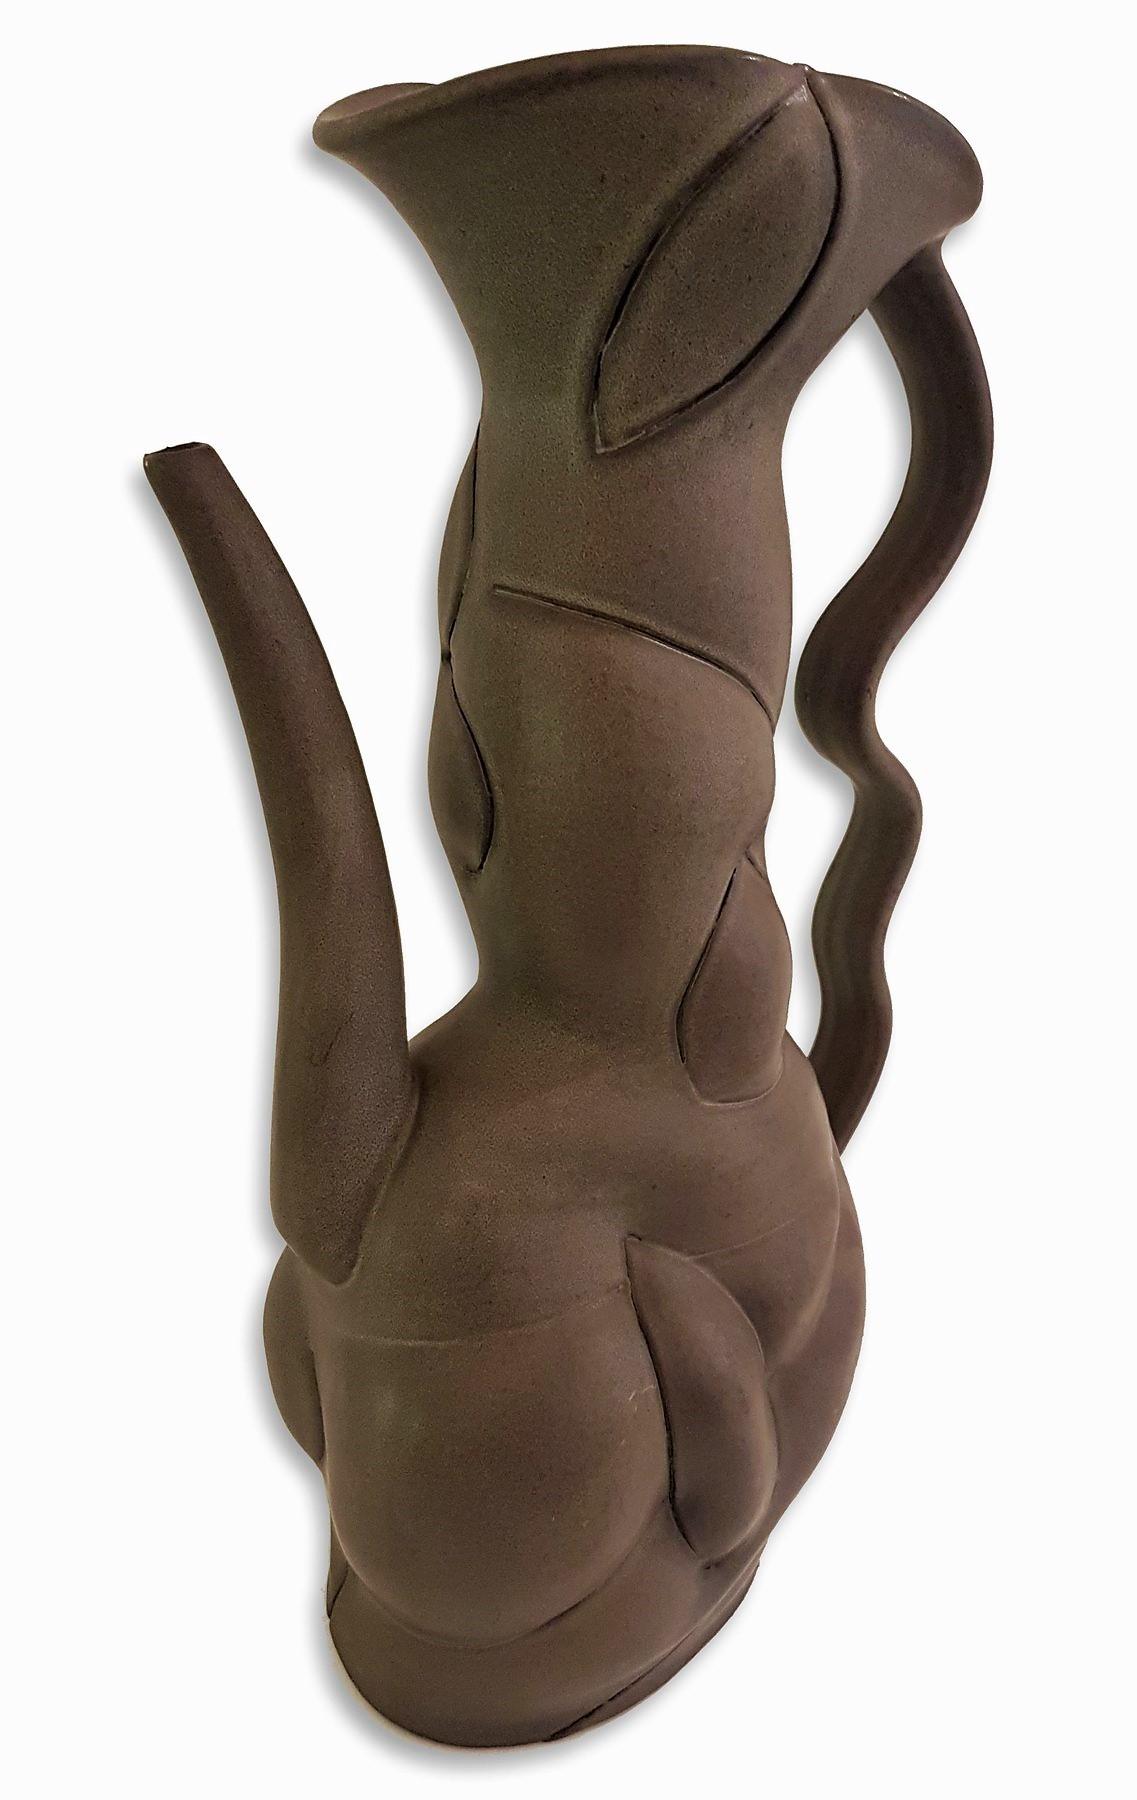 Untitled Pitcher - Modern Sculpture by Chris Gustin